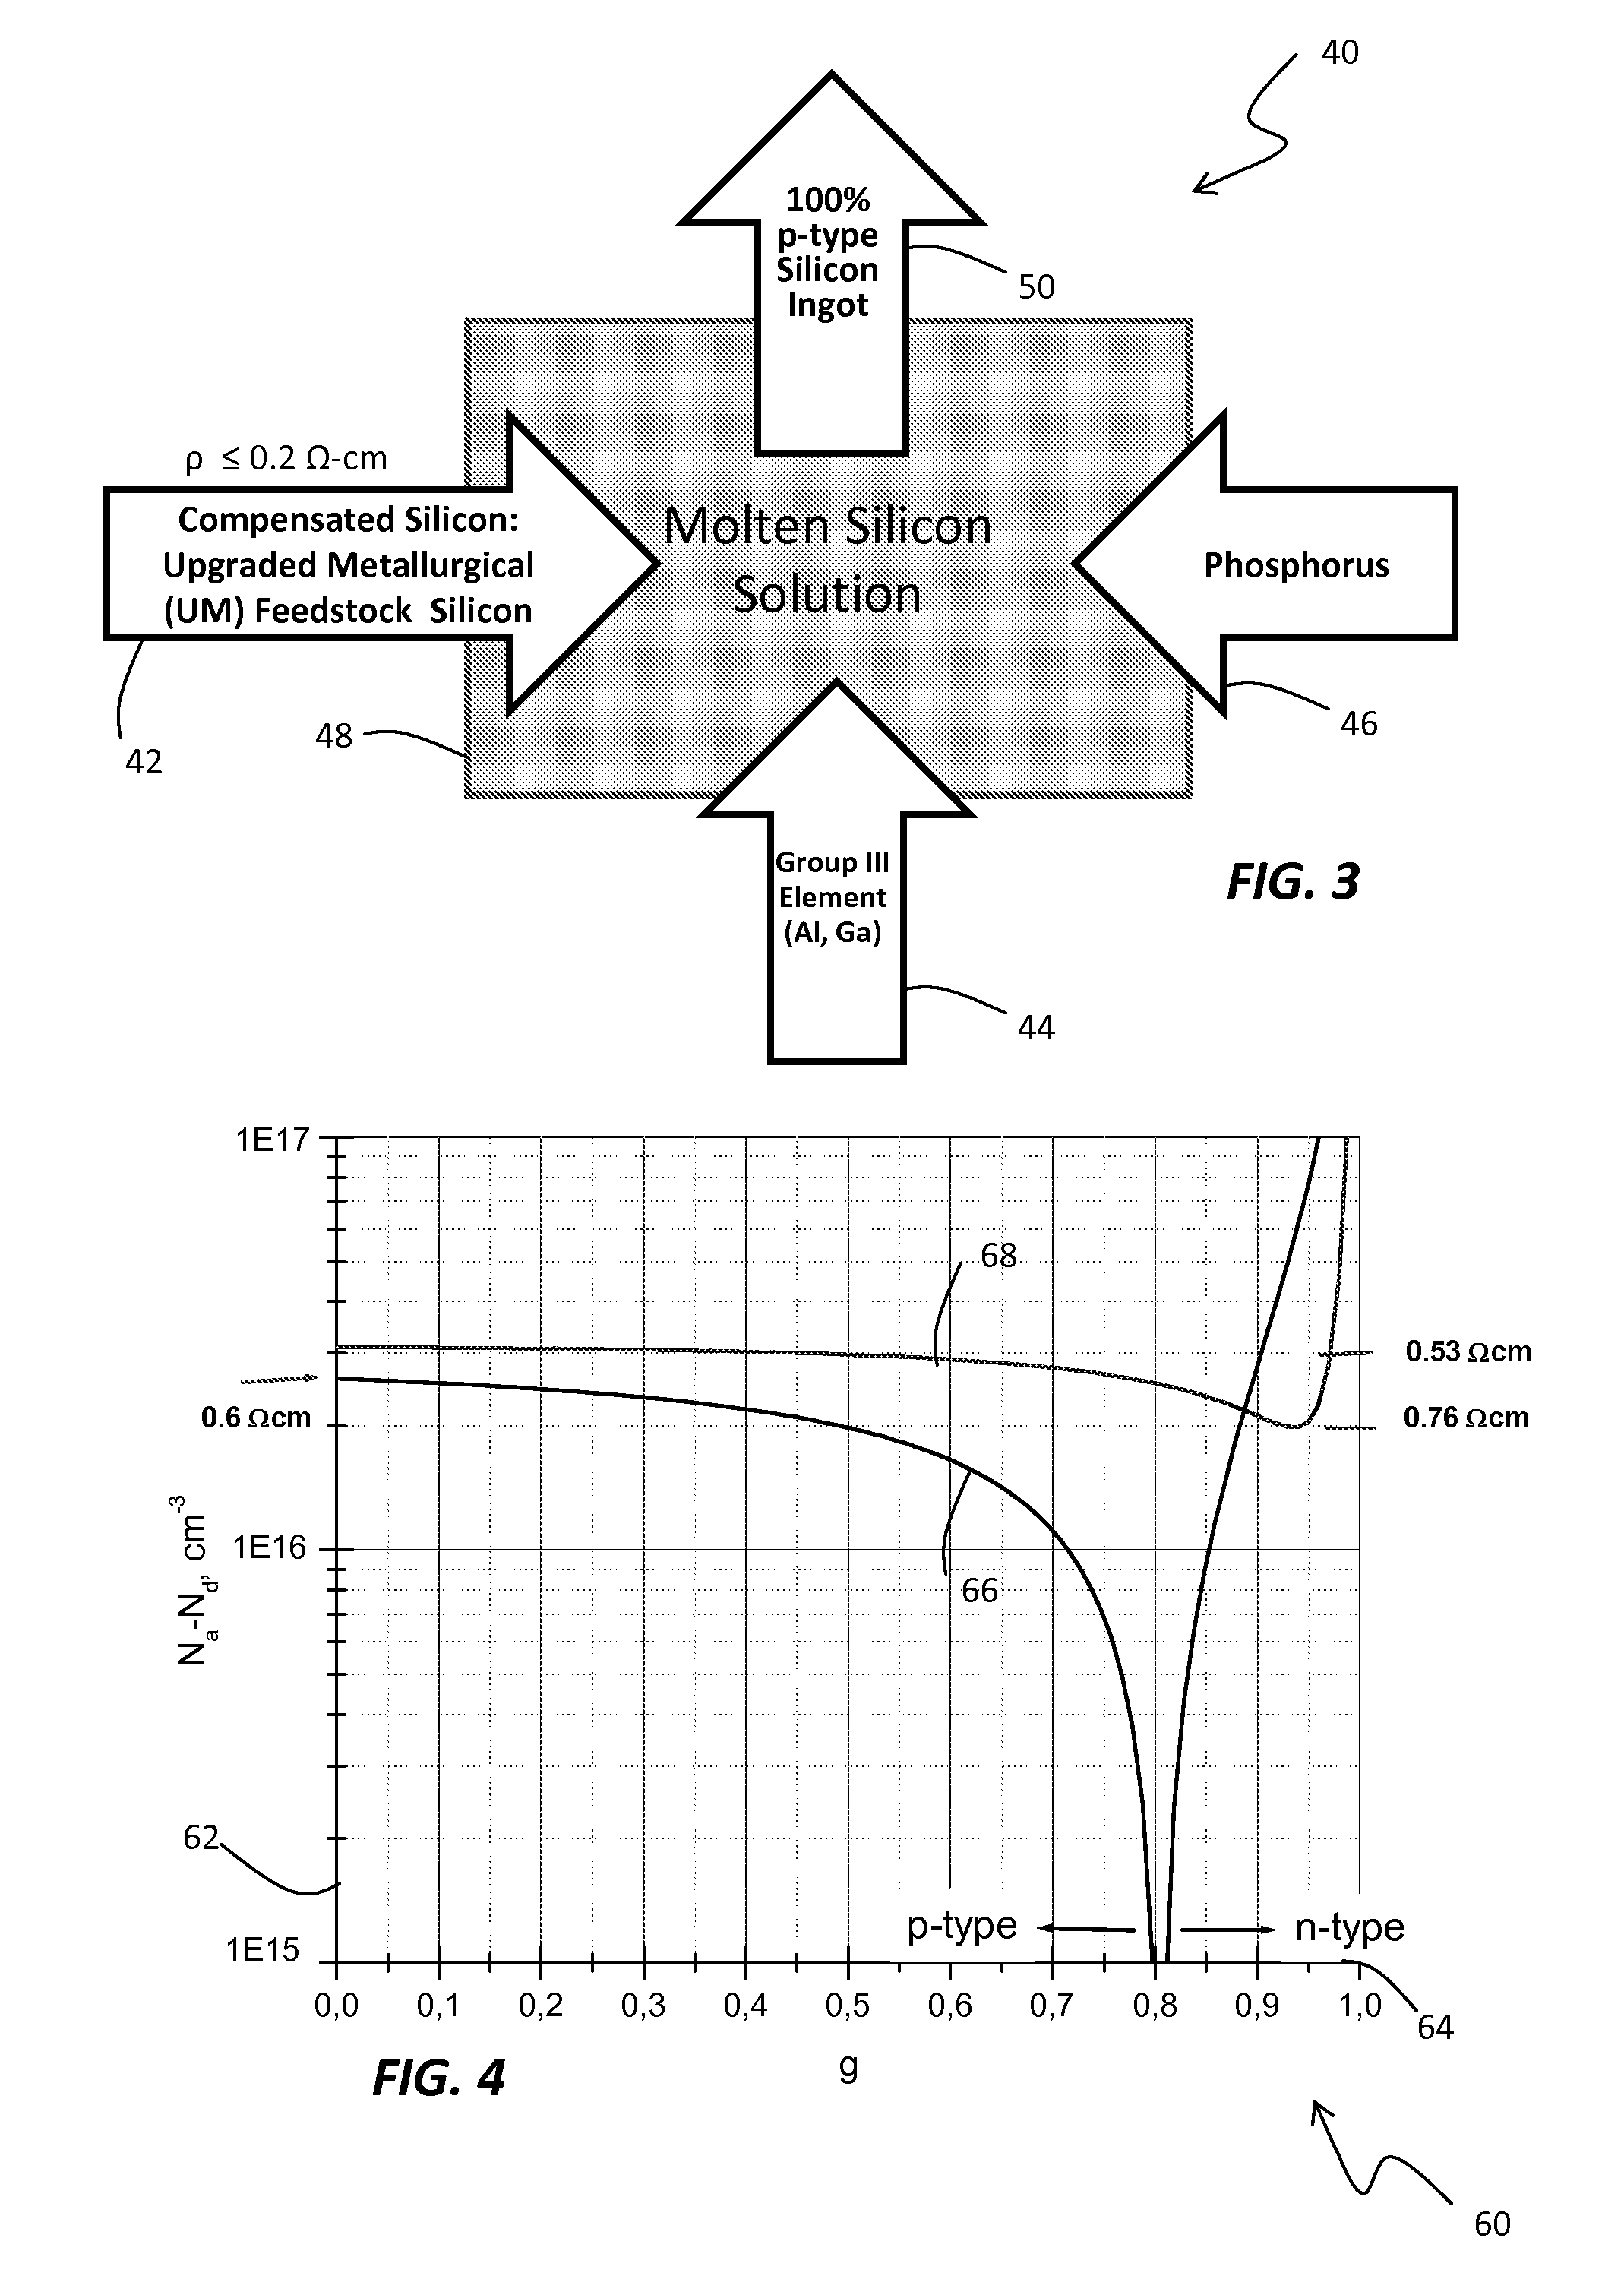 Method and system for controlling resistivity in ingots made of compensated feedstock silicon